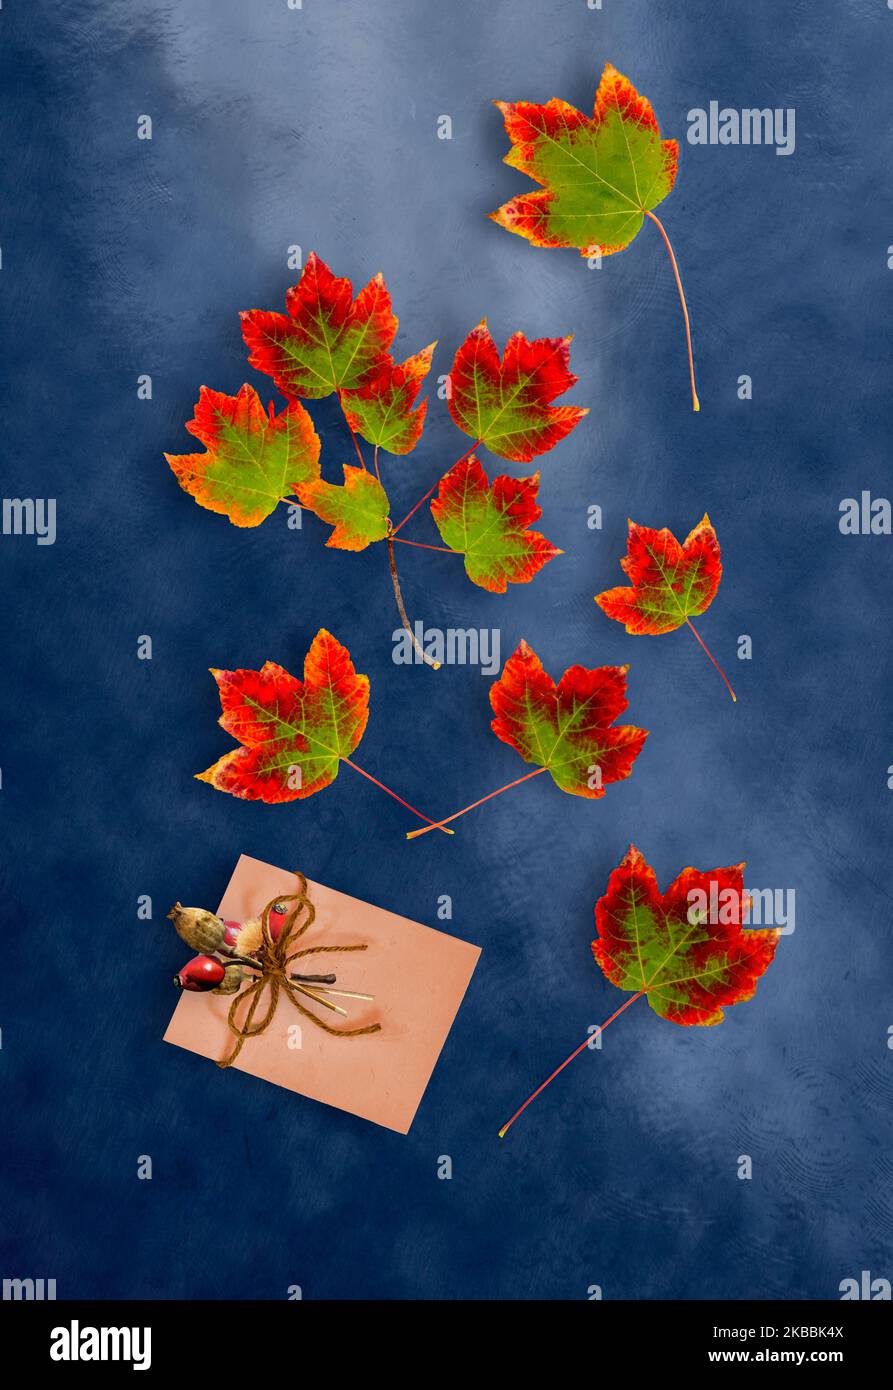 Colorful red and green autumn maple leaves on dark blue background. Envelope with dried flowers and a bow. Stock Photo